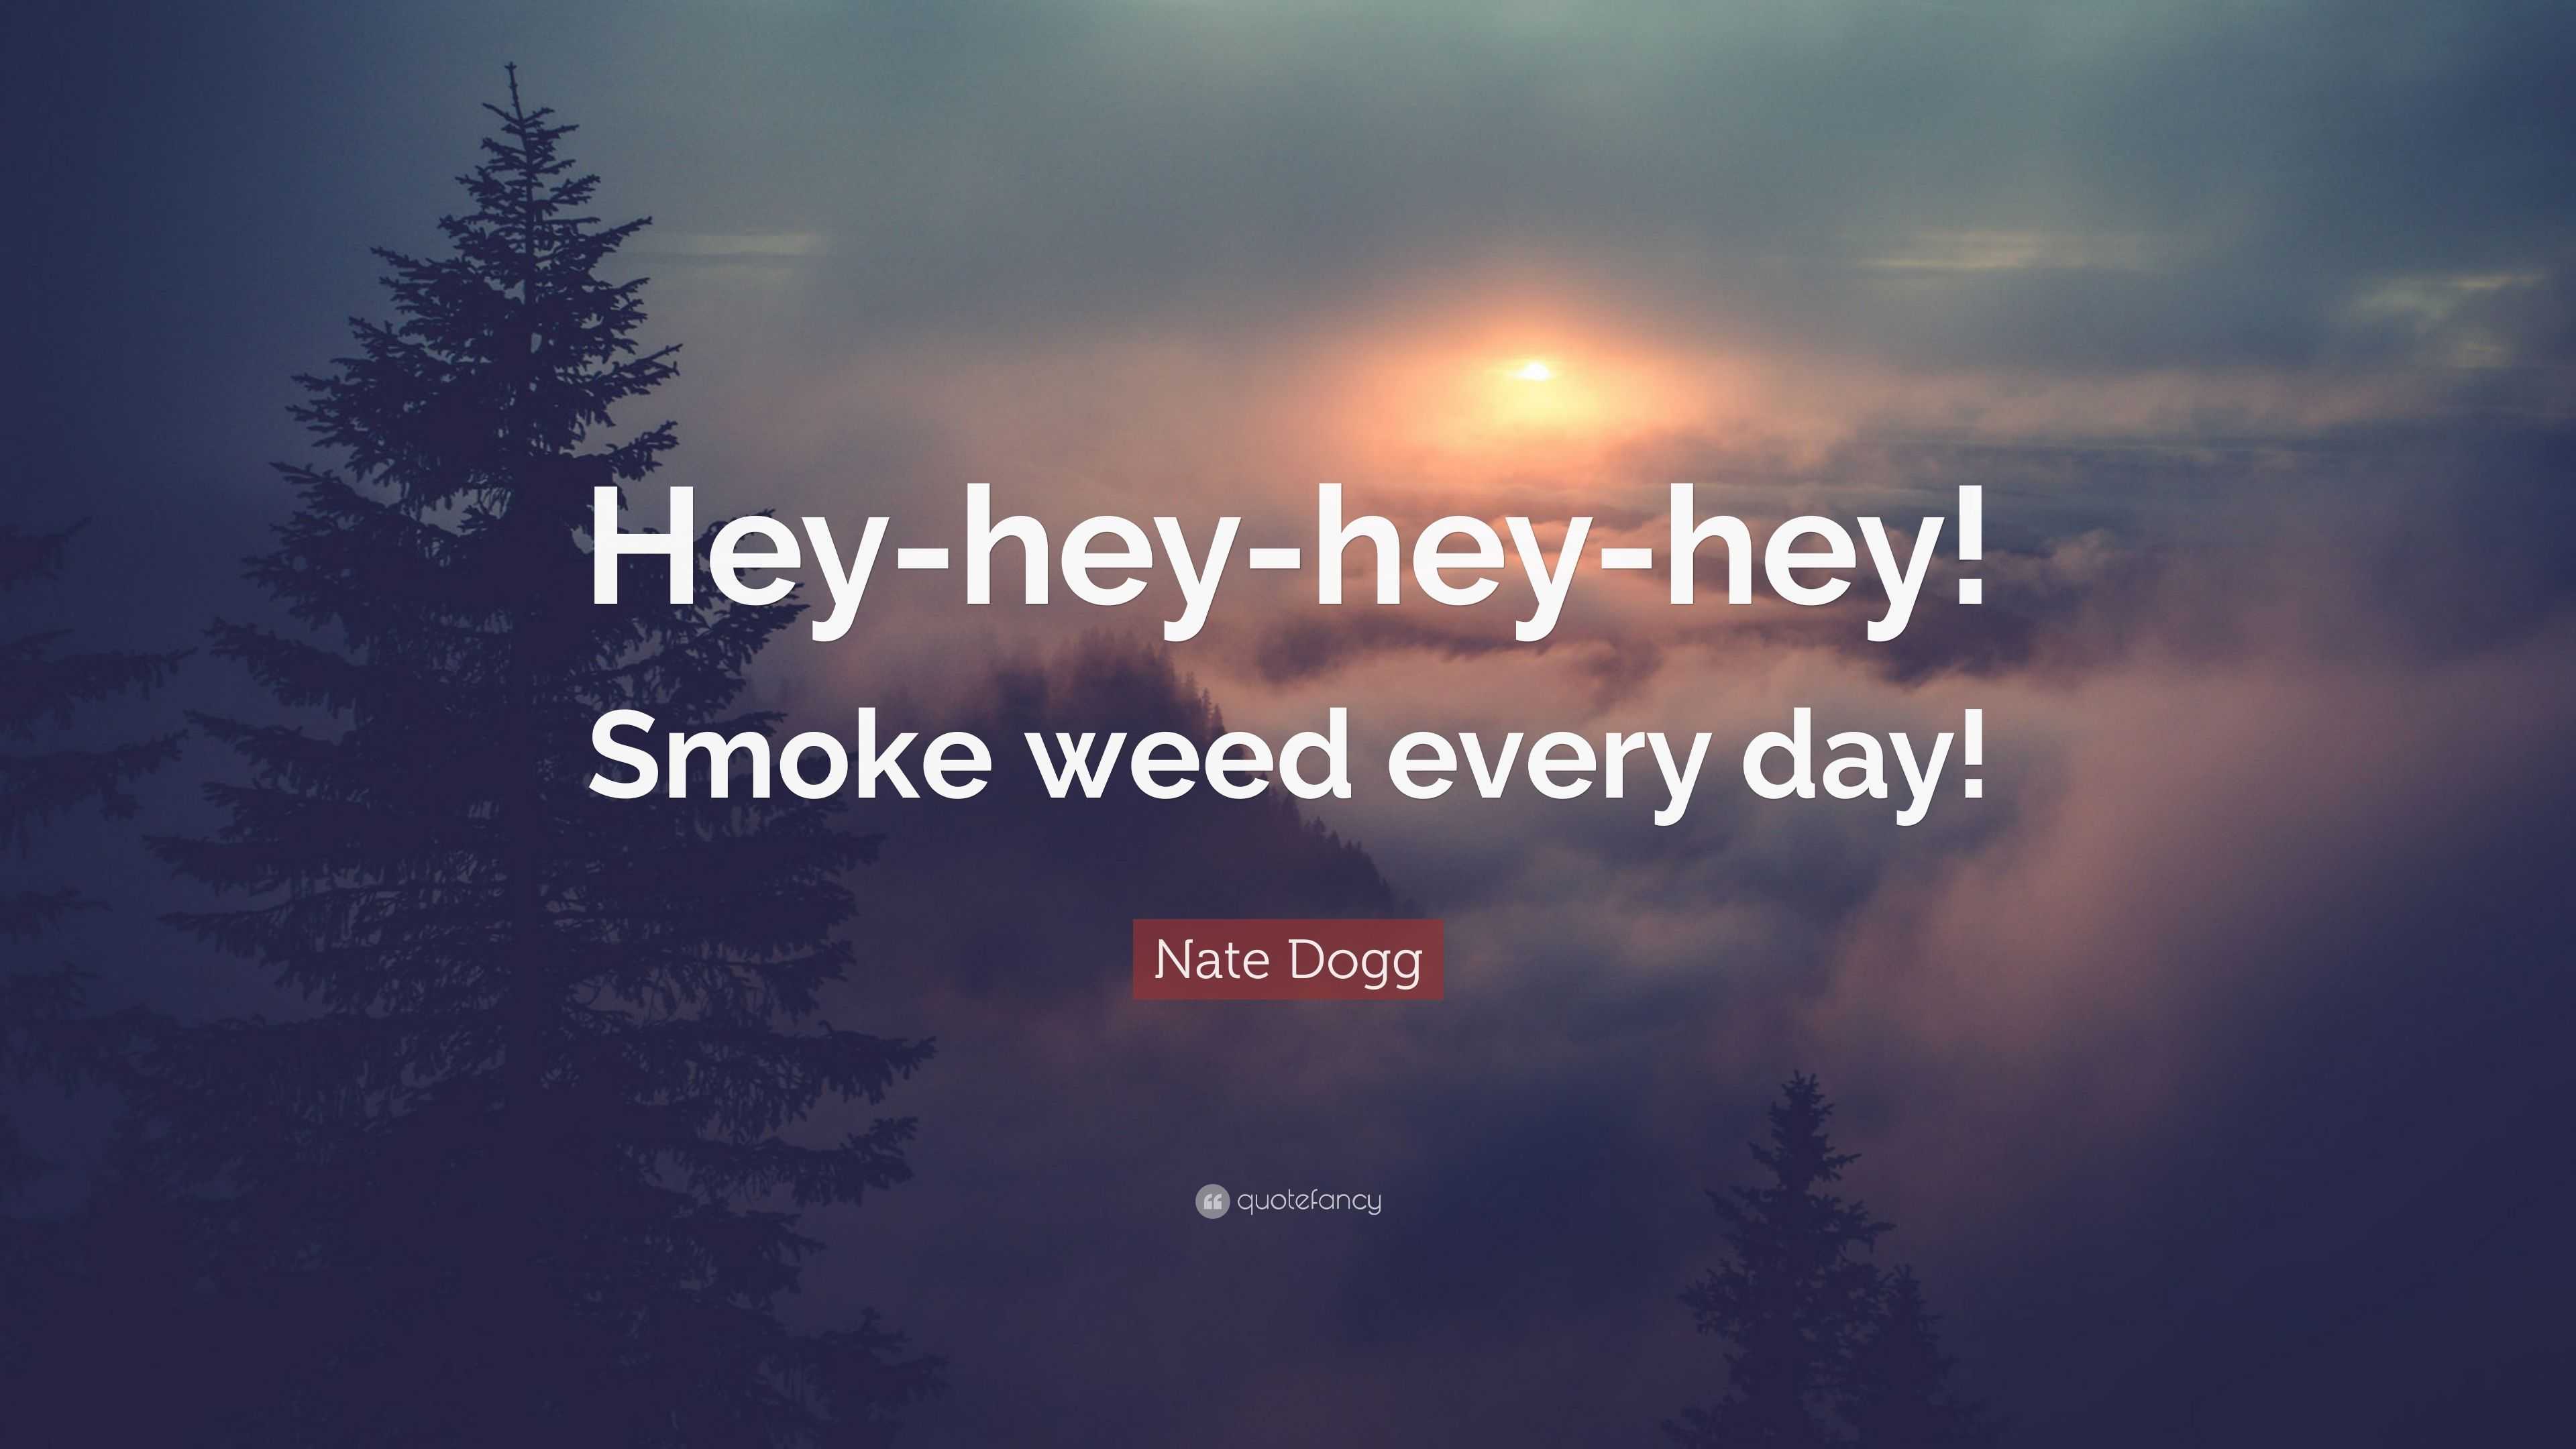 smoke weed everyday quotes tumblr